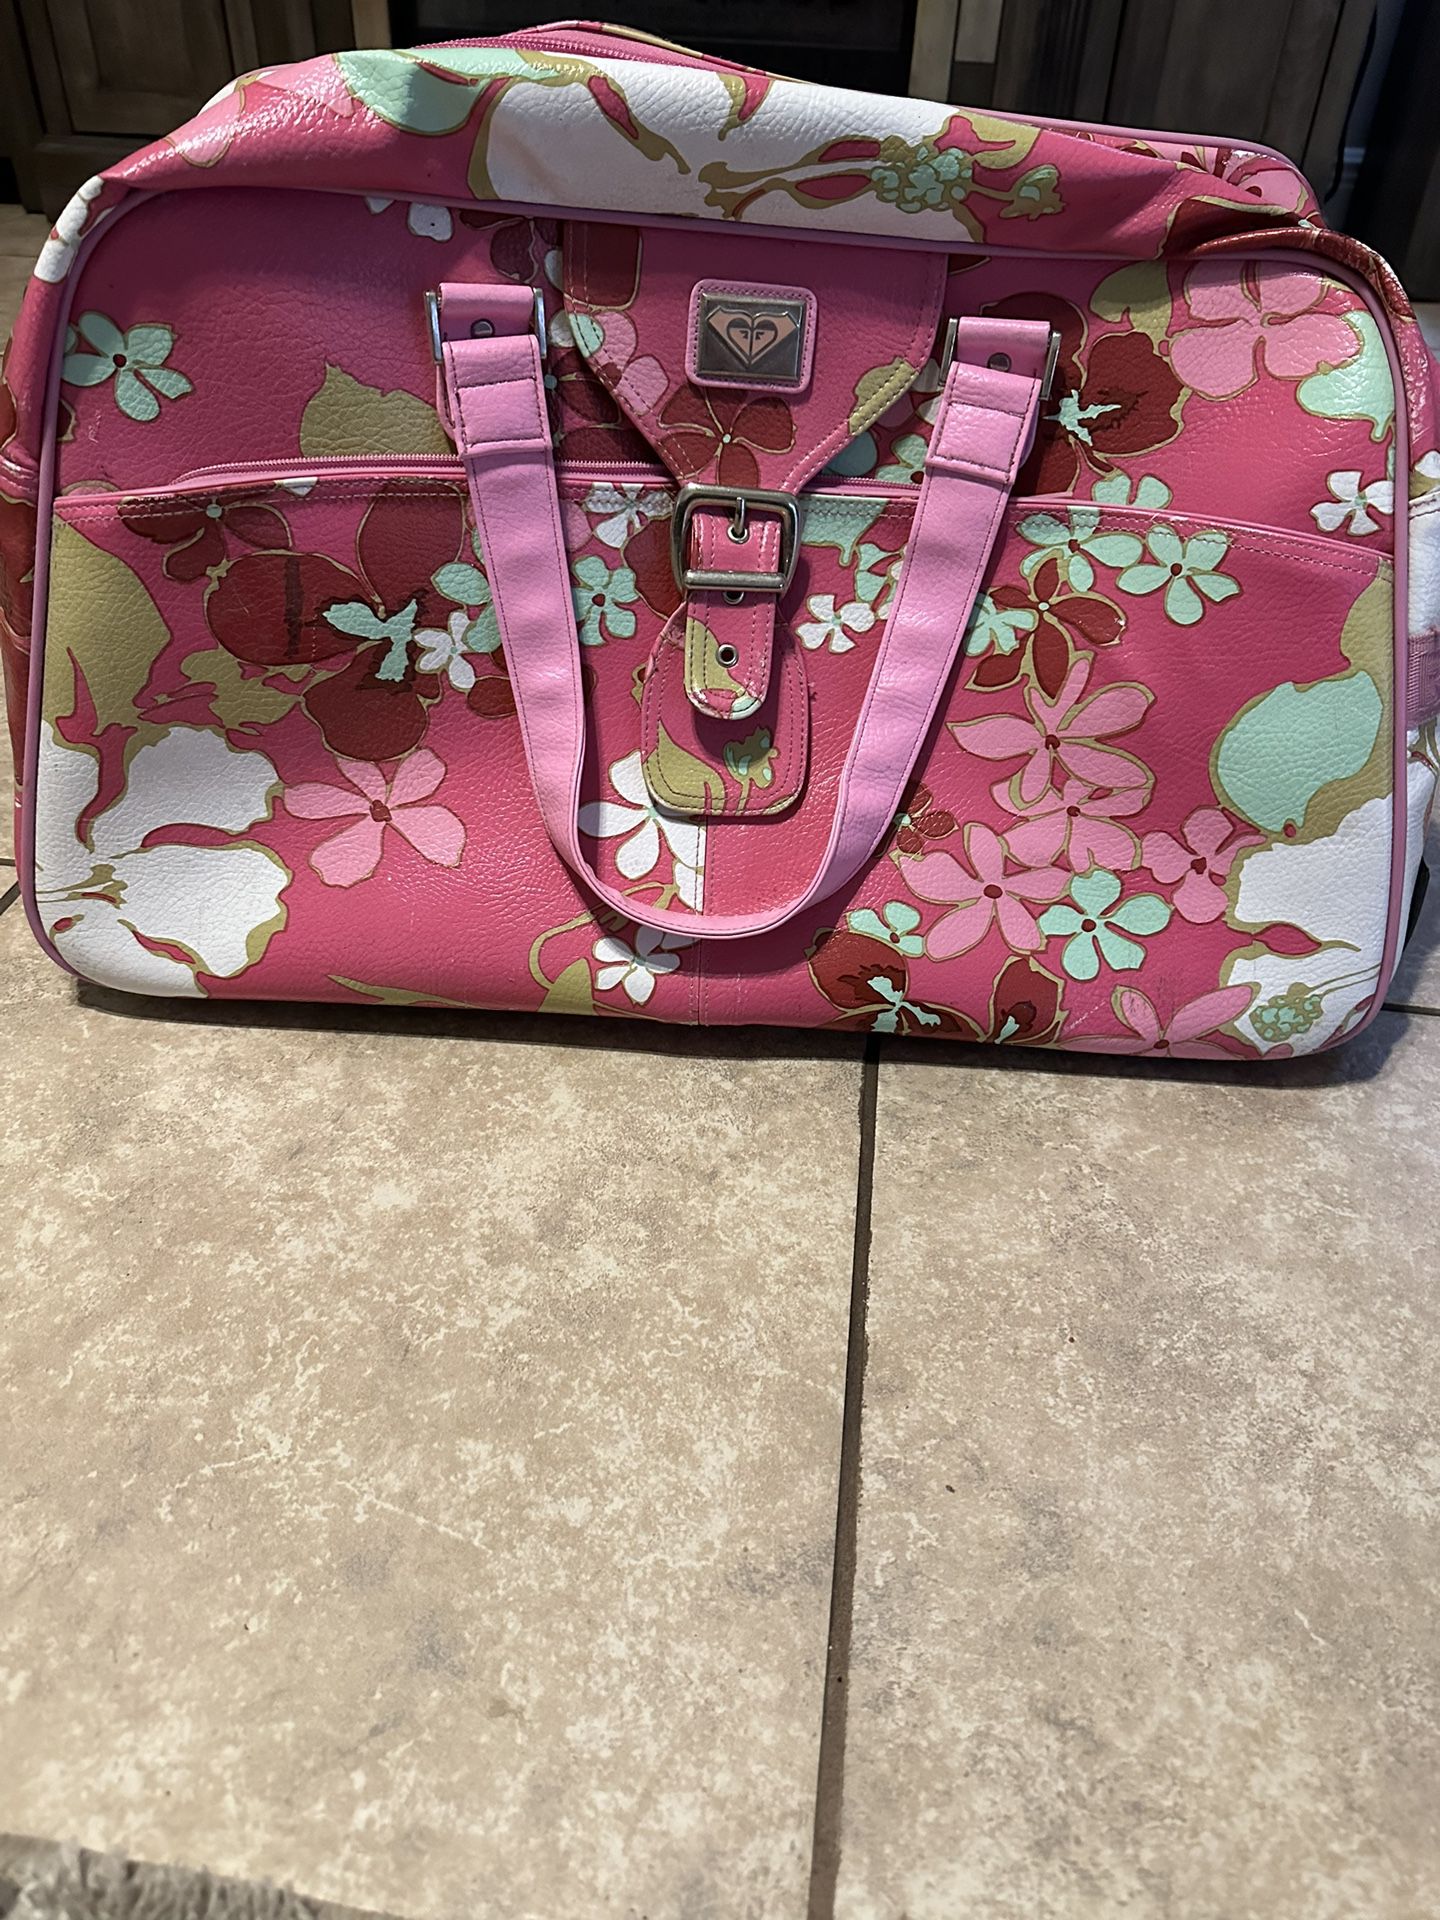 Roxy Rare Vintage Pink Floral Bag With Wheels